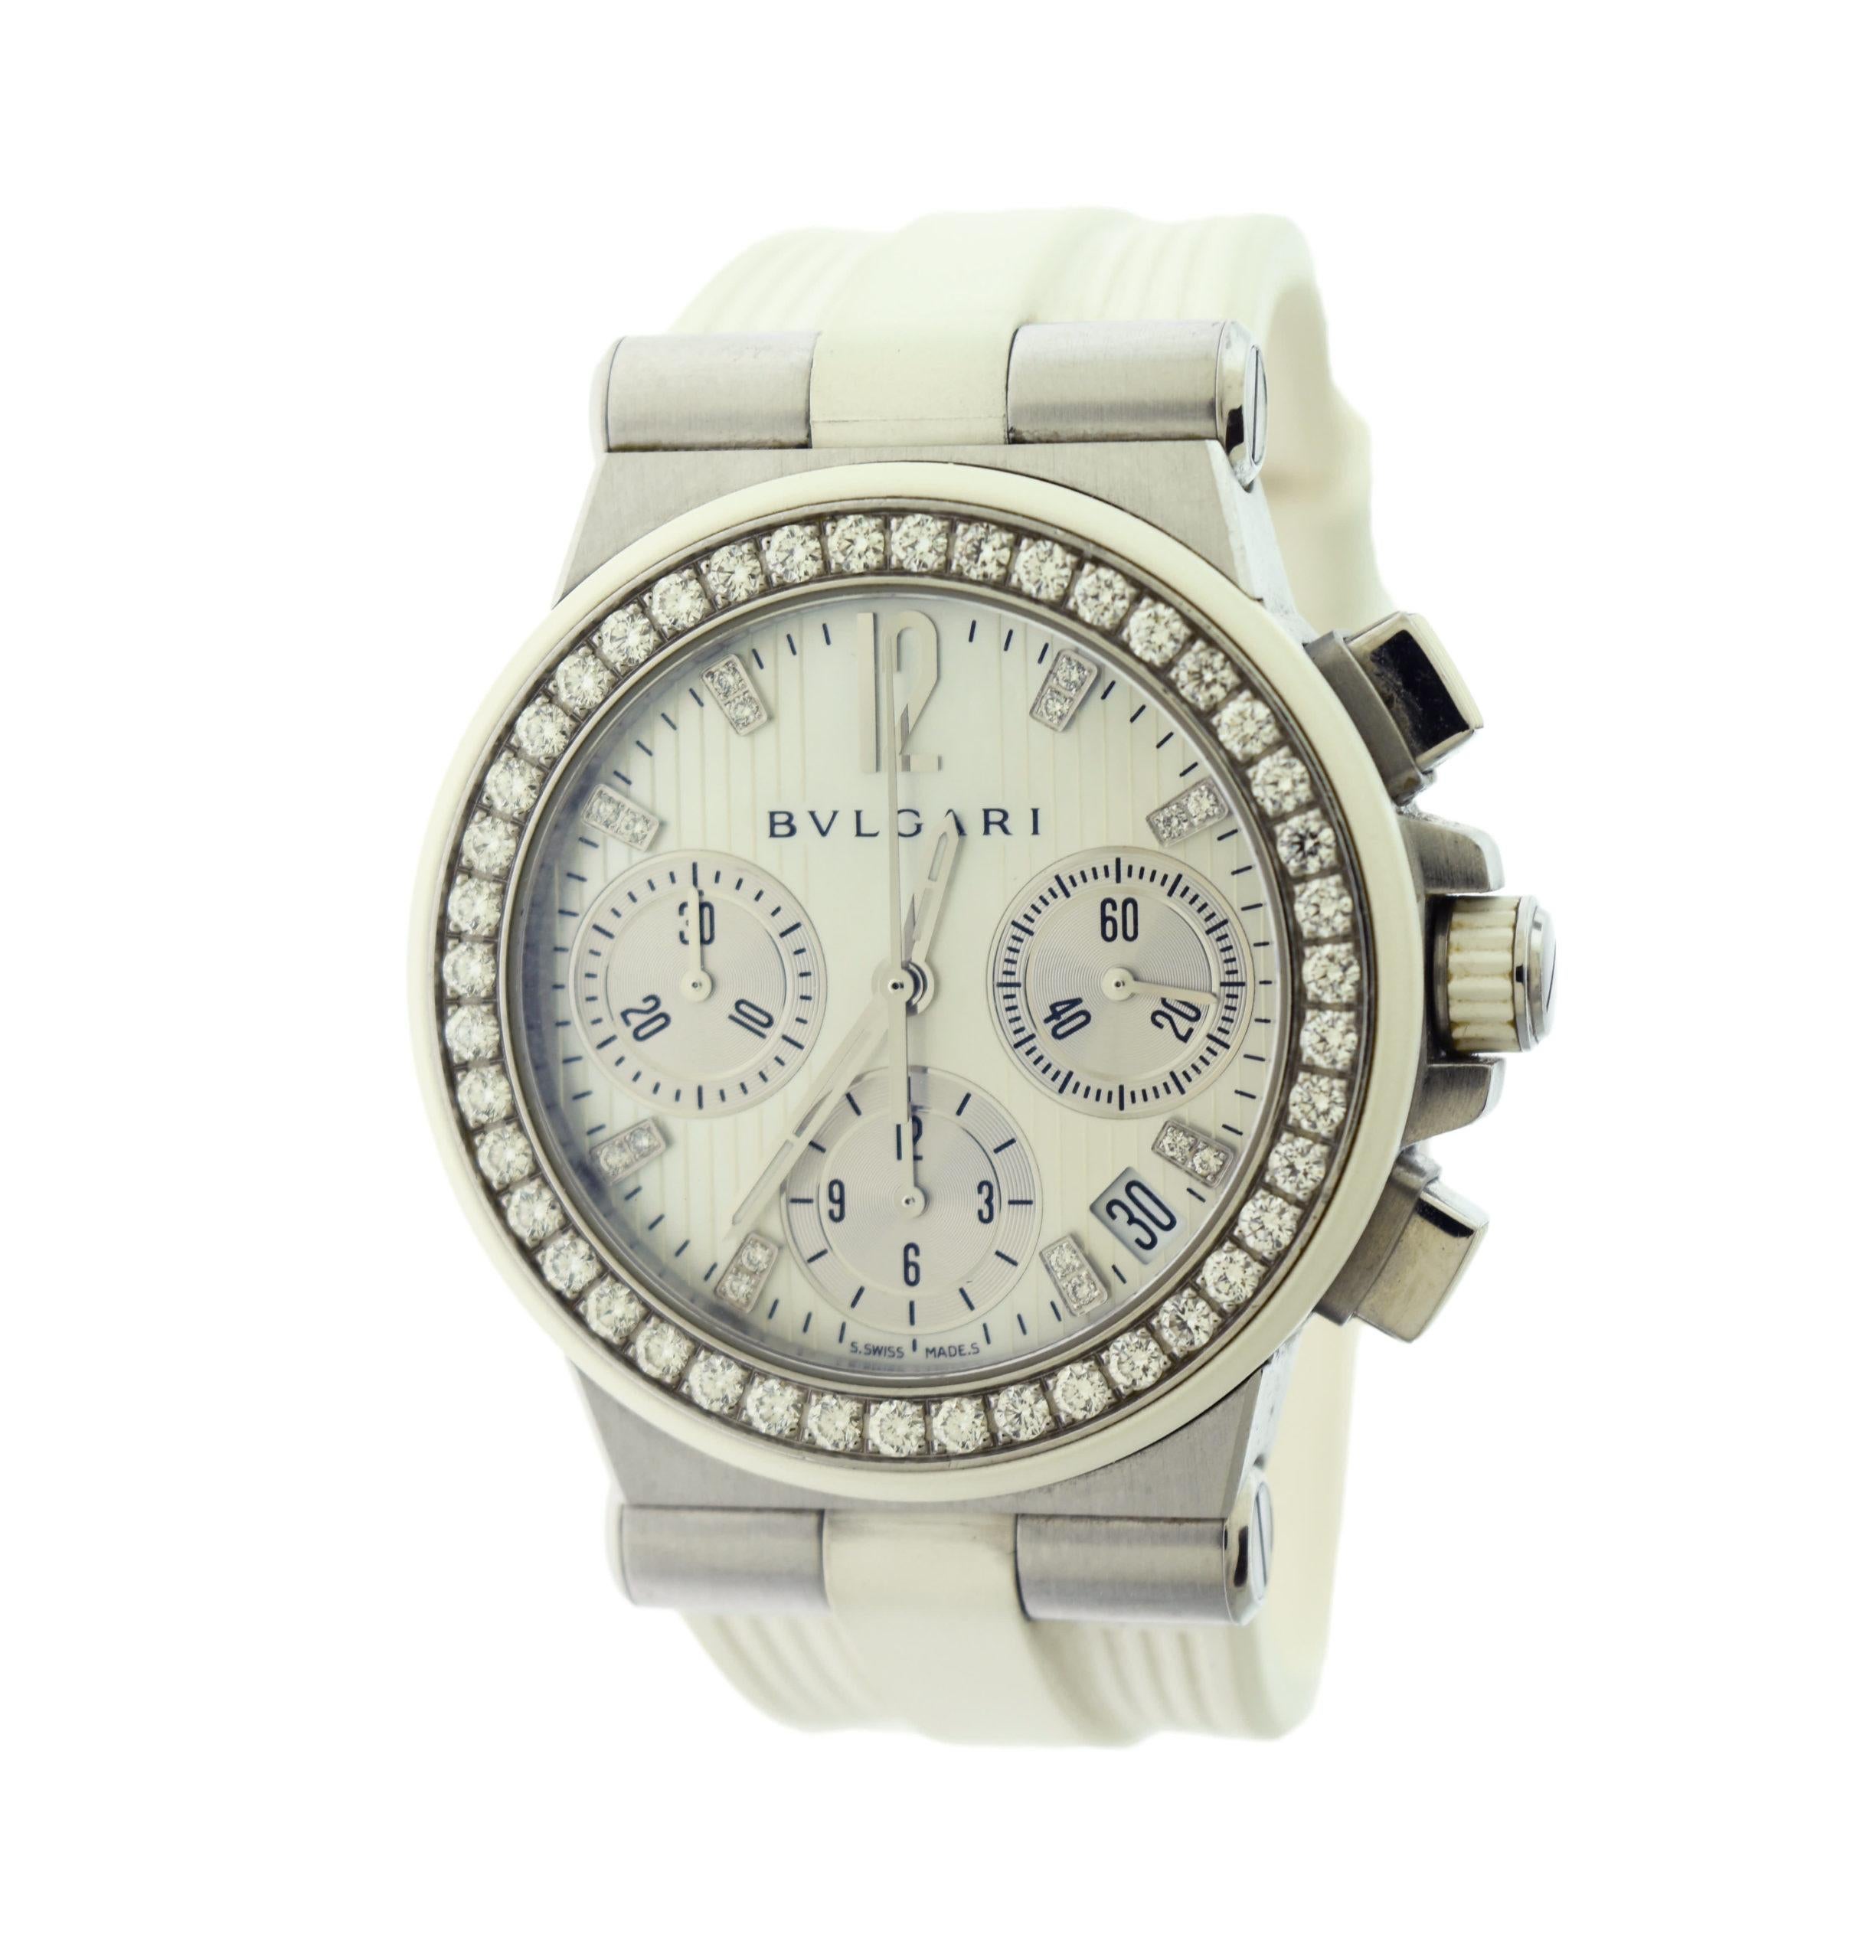 Designer: Bvlgari

Style: Watch

Metal: Stainless Steel

Stones: Round Brilliant Cut Diamonds

Case Size: 35mm

Dial: White Mother of Pearl; Chronograph

Bezel: Diamond Set

Crystal: Scratch Resistant Sapphire

Sub Dial :  Three – 60 Second, 30